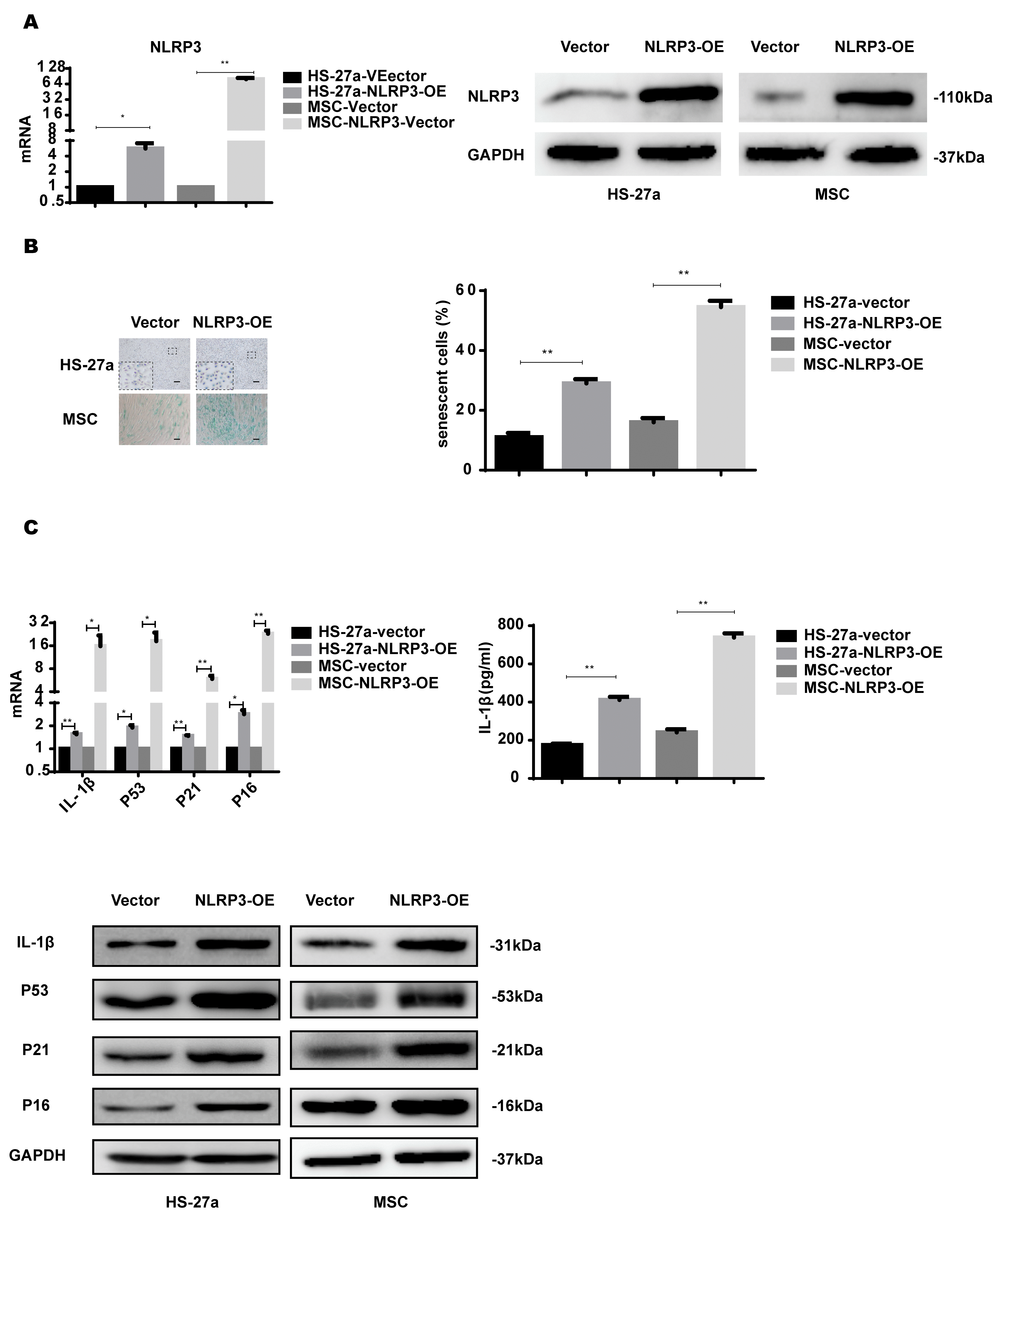 NLRP3 overexpression induces IL-1β secretion and cellular senescence. (A) The efficiency of NLRP3 overexpression was assayed with qPCR and western blot. (B) Senescent cells were counted and visualized in graphs (40 × magnification). The levels of p53, p21, p16, and IL-1β were measured by qPCR and western blot. Data are expressed as mean ± SD from three experiments. *P